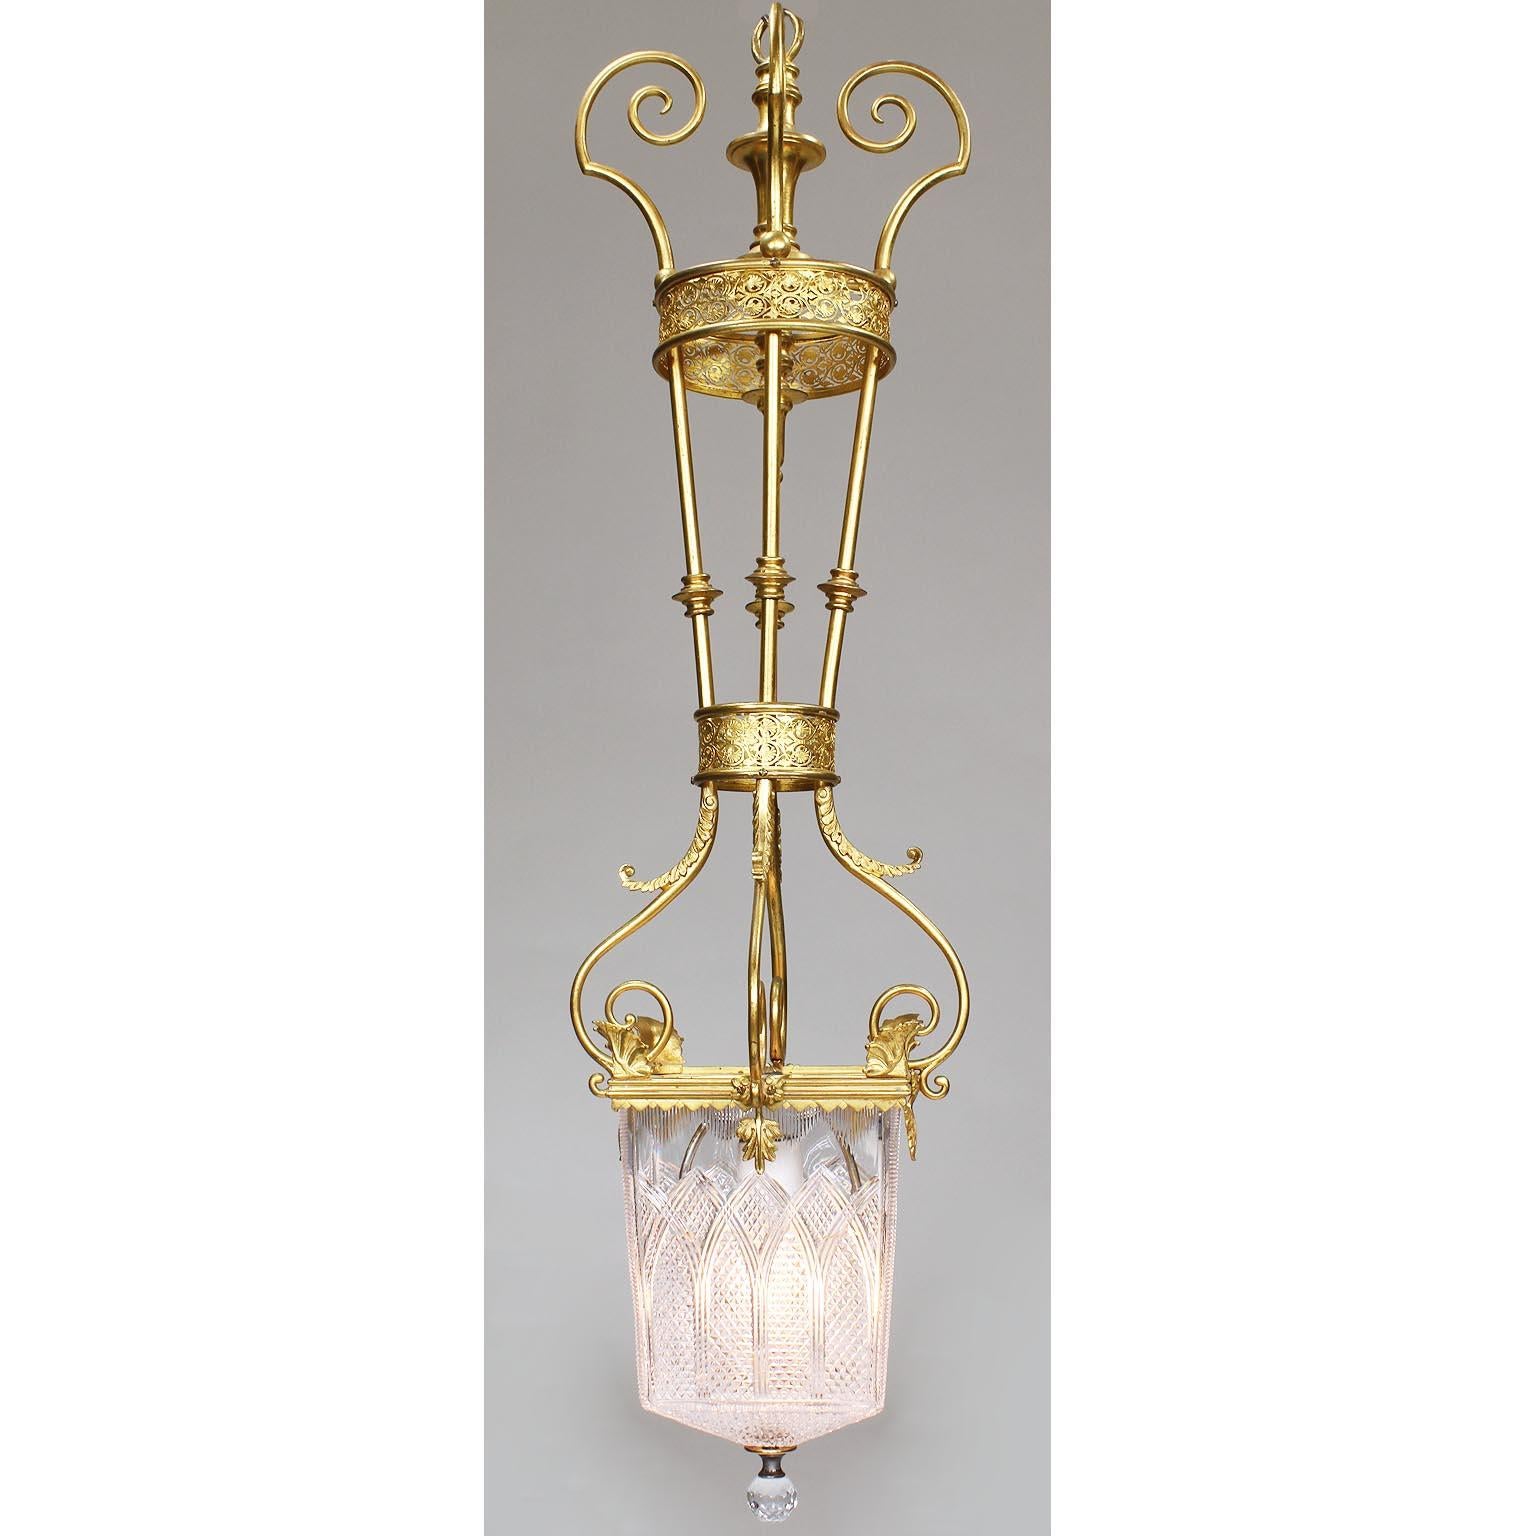 A fine pair of French 19th-20th century Belle Époque neoclassical style gilt-metal and cut-molded-glass hanging lanterns. The single-light scrolled finely chased gilt-metal body with scrolls, leaves and acanthus supporting cut-glass shade ending